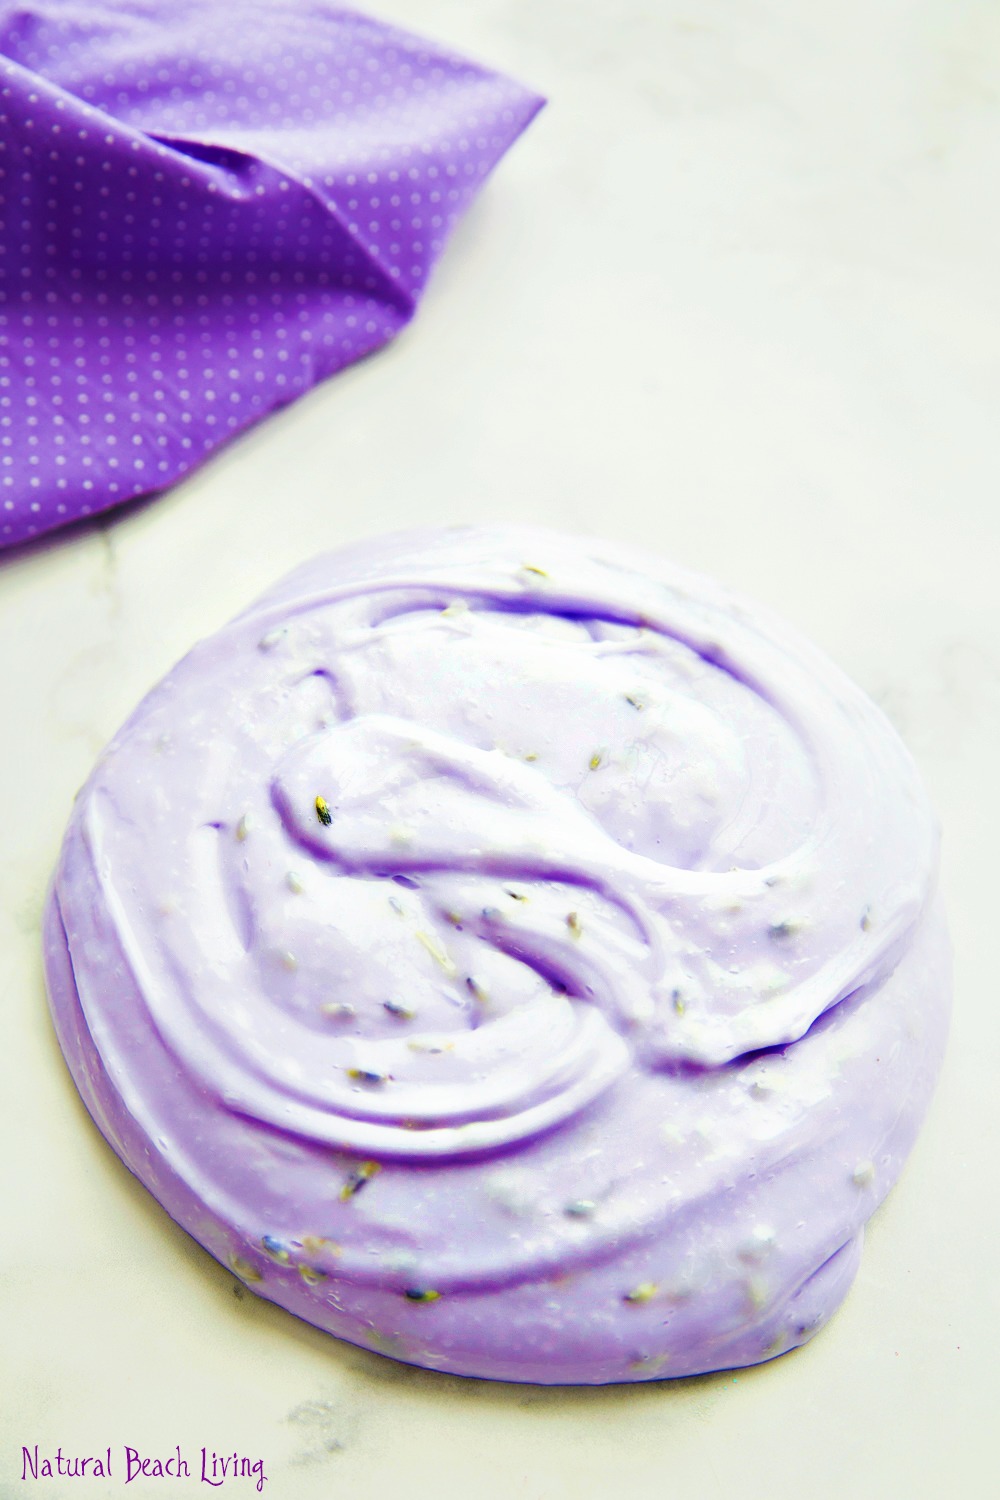 Calming Lavender Slime Recipe To Try Right Now, Anti Stress Slime Recipe, aromatherapy Slime Recipe, The Best Liquid Starch Slime, The Best Calming Lavender Slime Recipe, How to make The Best Calming Jiggly Slime Recipe, how to make Anxiety Slime, Slime Recipe with essential oils, A Wonderful Therapeutic Slime Recipe, Slime Science, Plus Slime Videos with How to Make Slime Instructions and DIY Slime Recipes